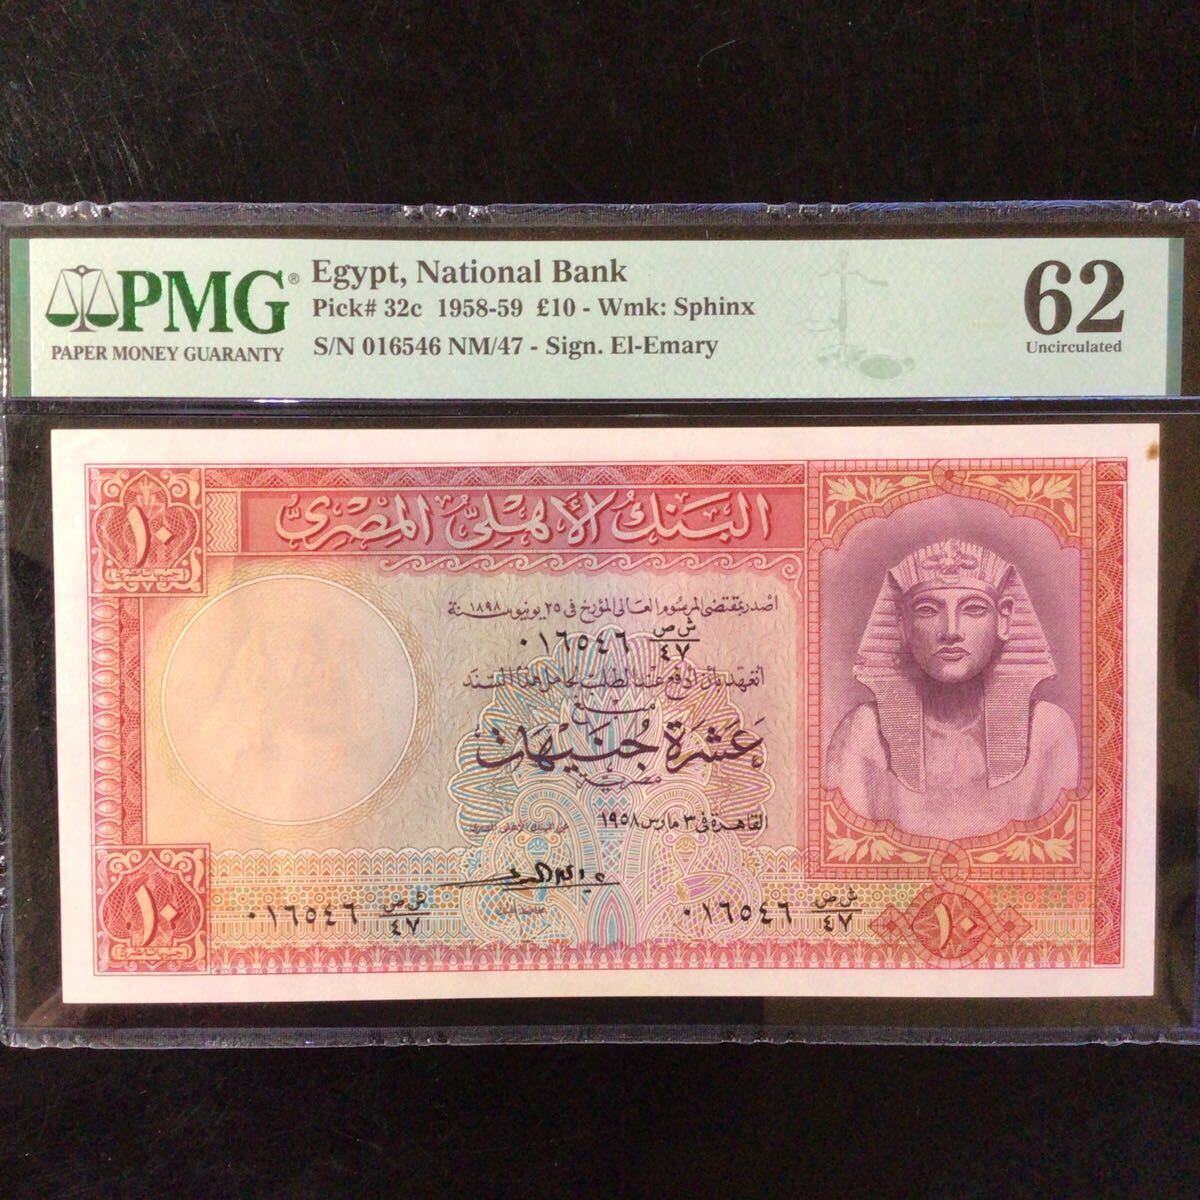 World Banknote Grading EGYPT《 National Bank》10 Pounds【1958】『PMG Grading Uncirculated 62』_画像1